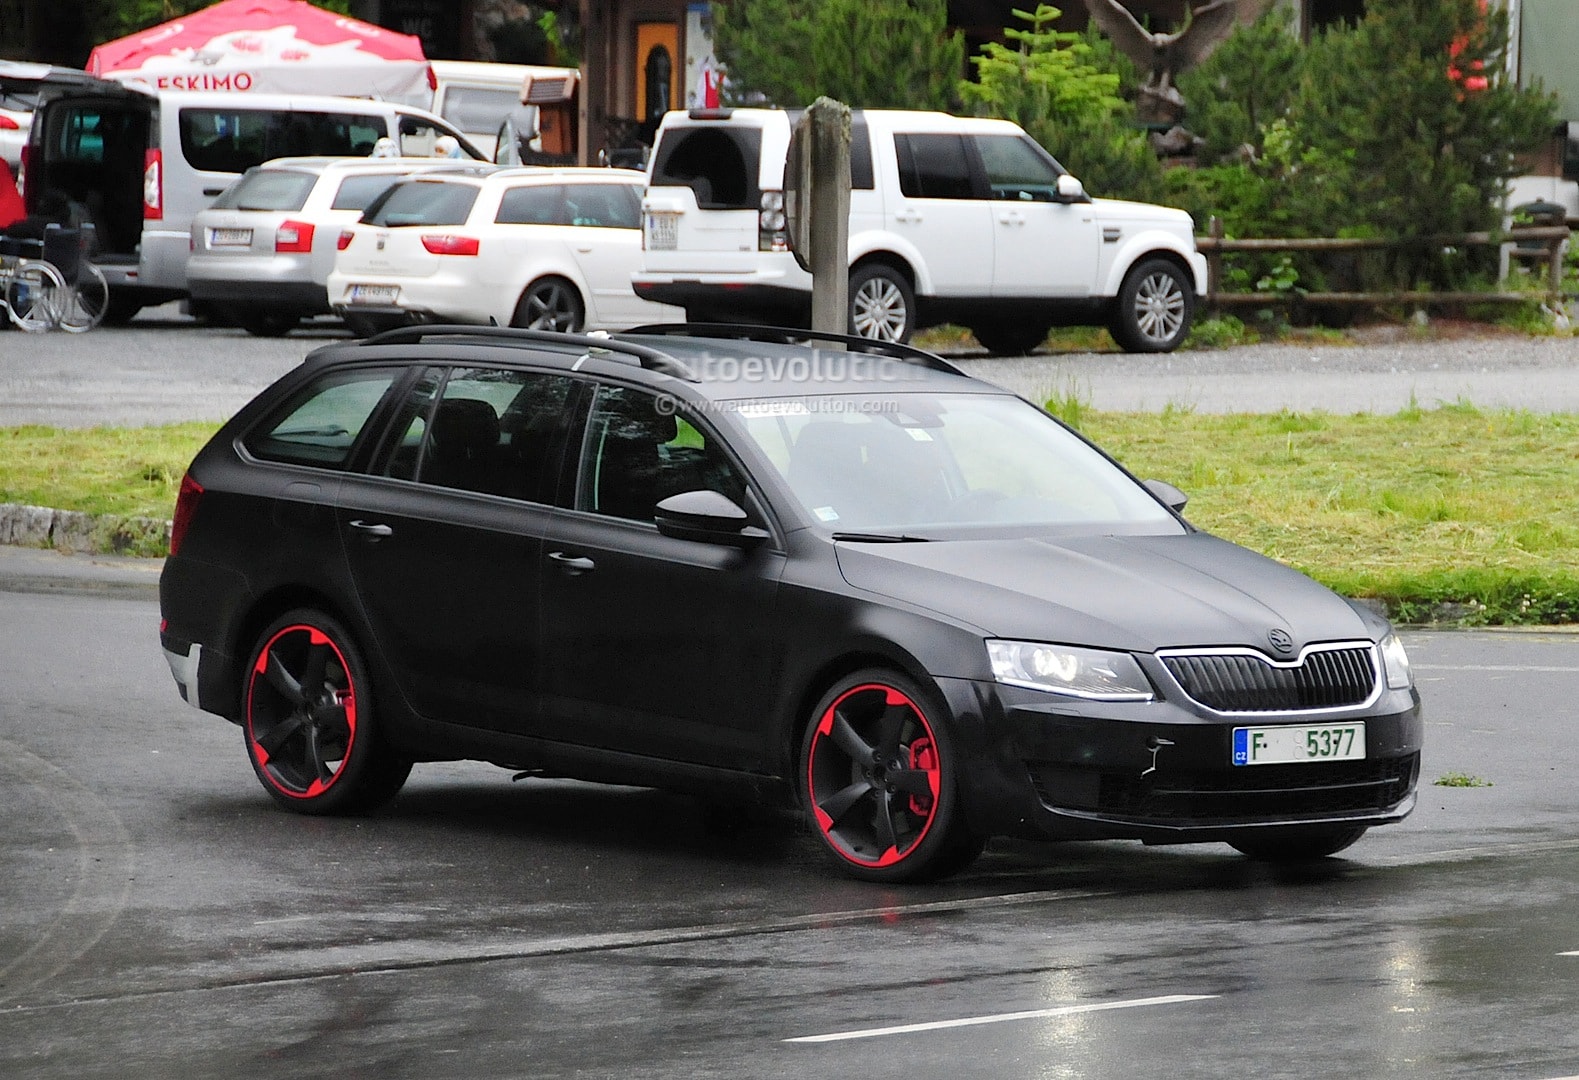 hardcore-skoda-octavia-vrs-with-280-hp-spied-for-the-first-time-photo ...